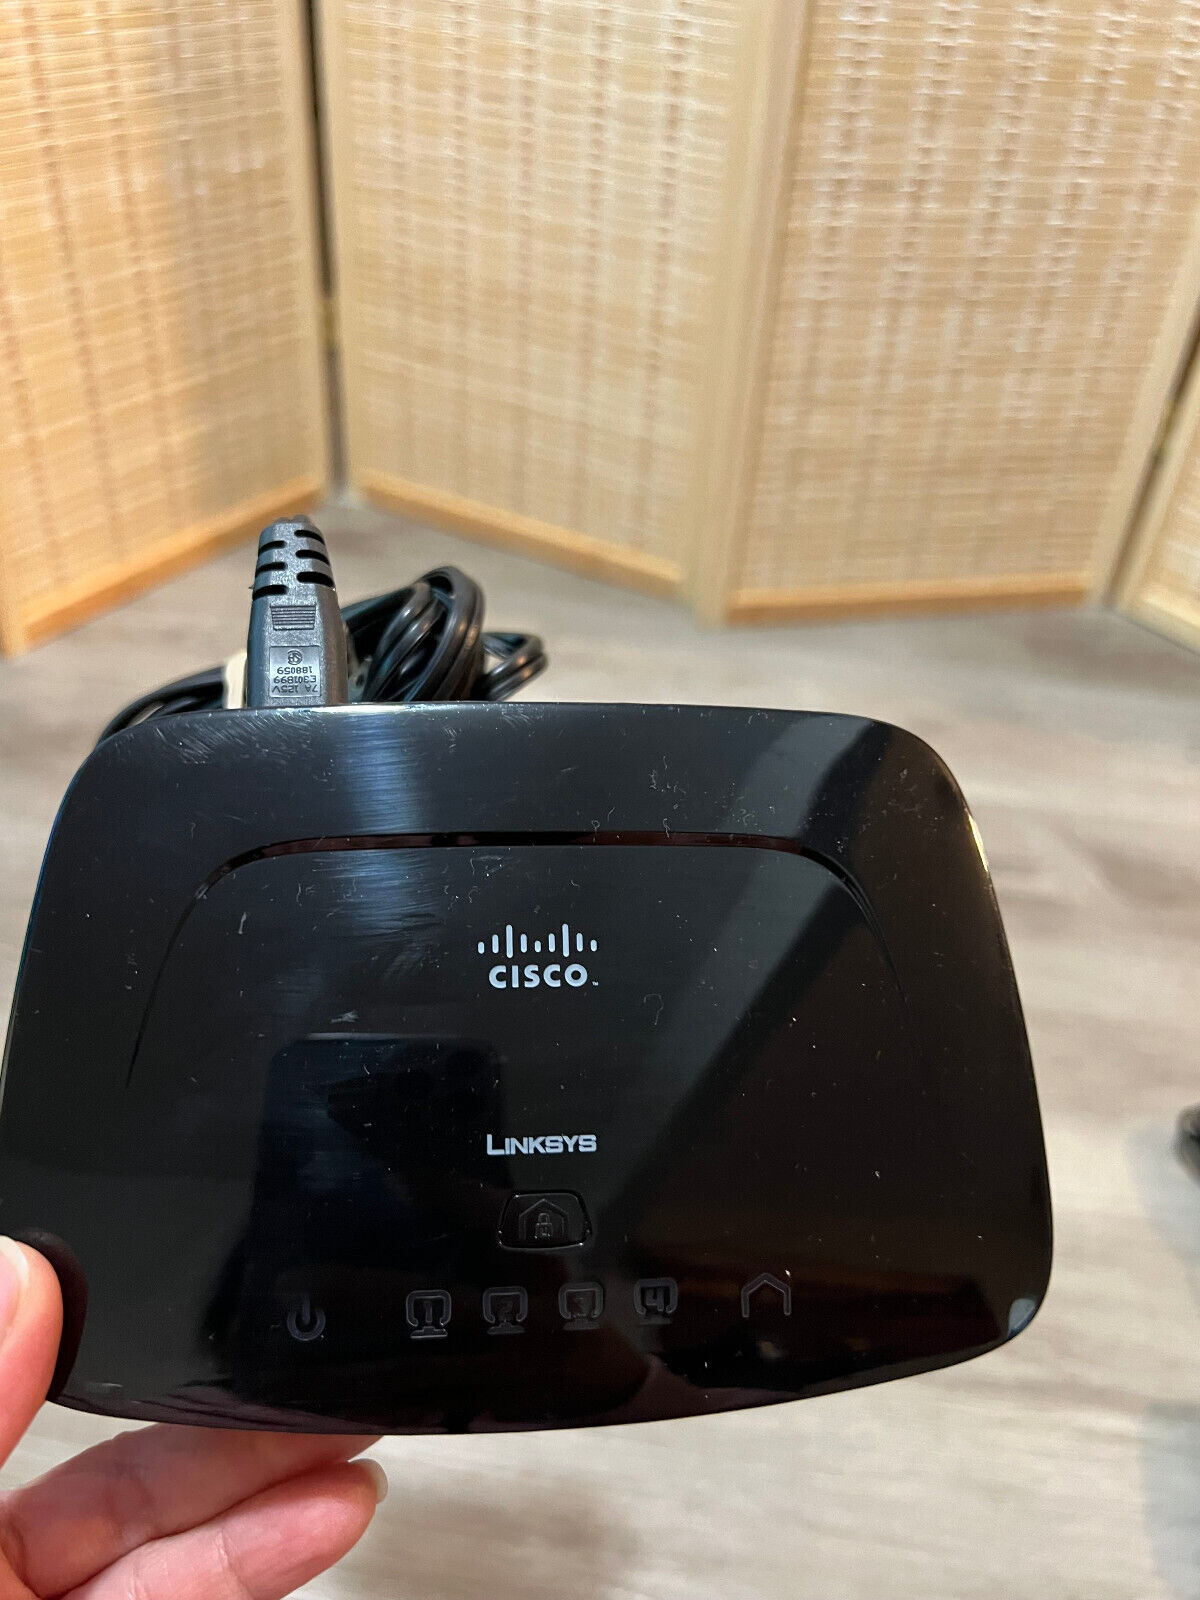 Cisco Linksys PLS300 Bundled With Power Cord Cable